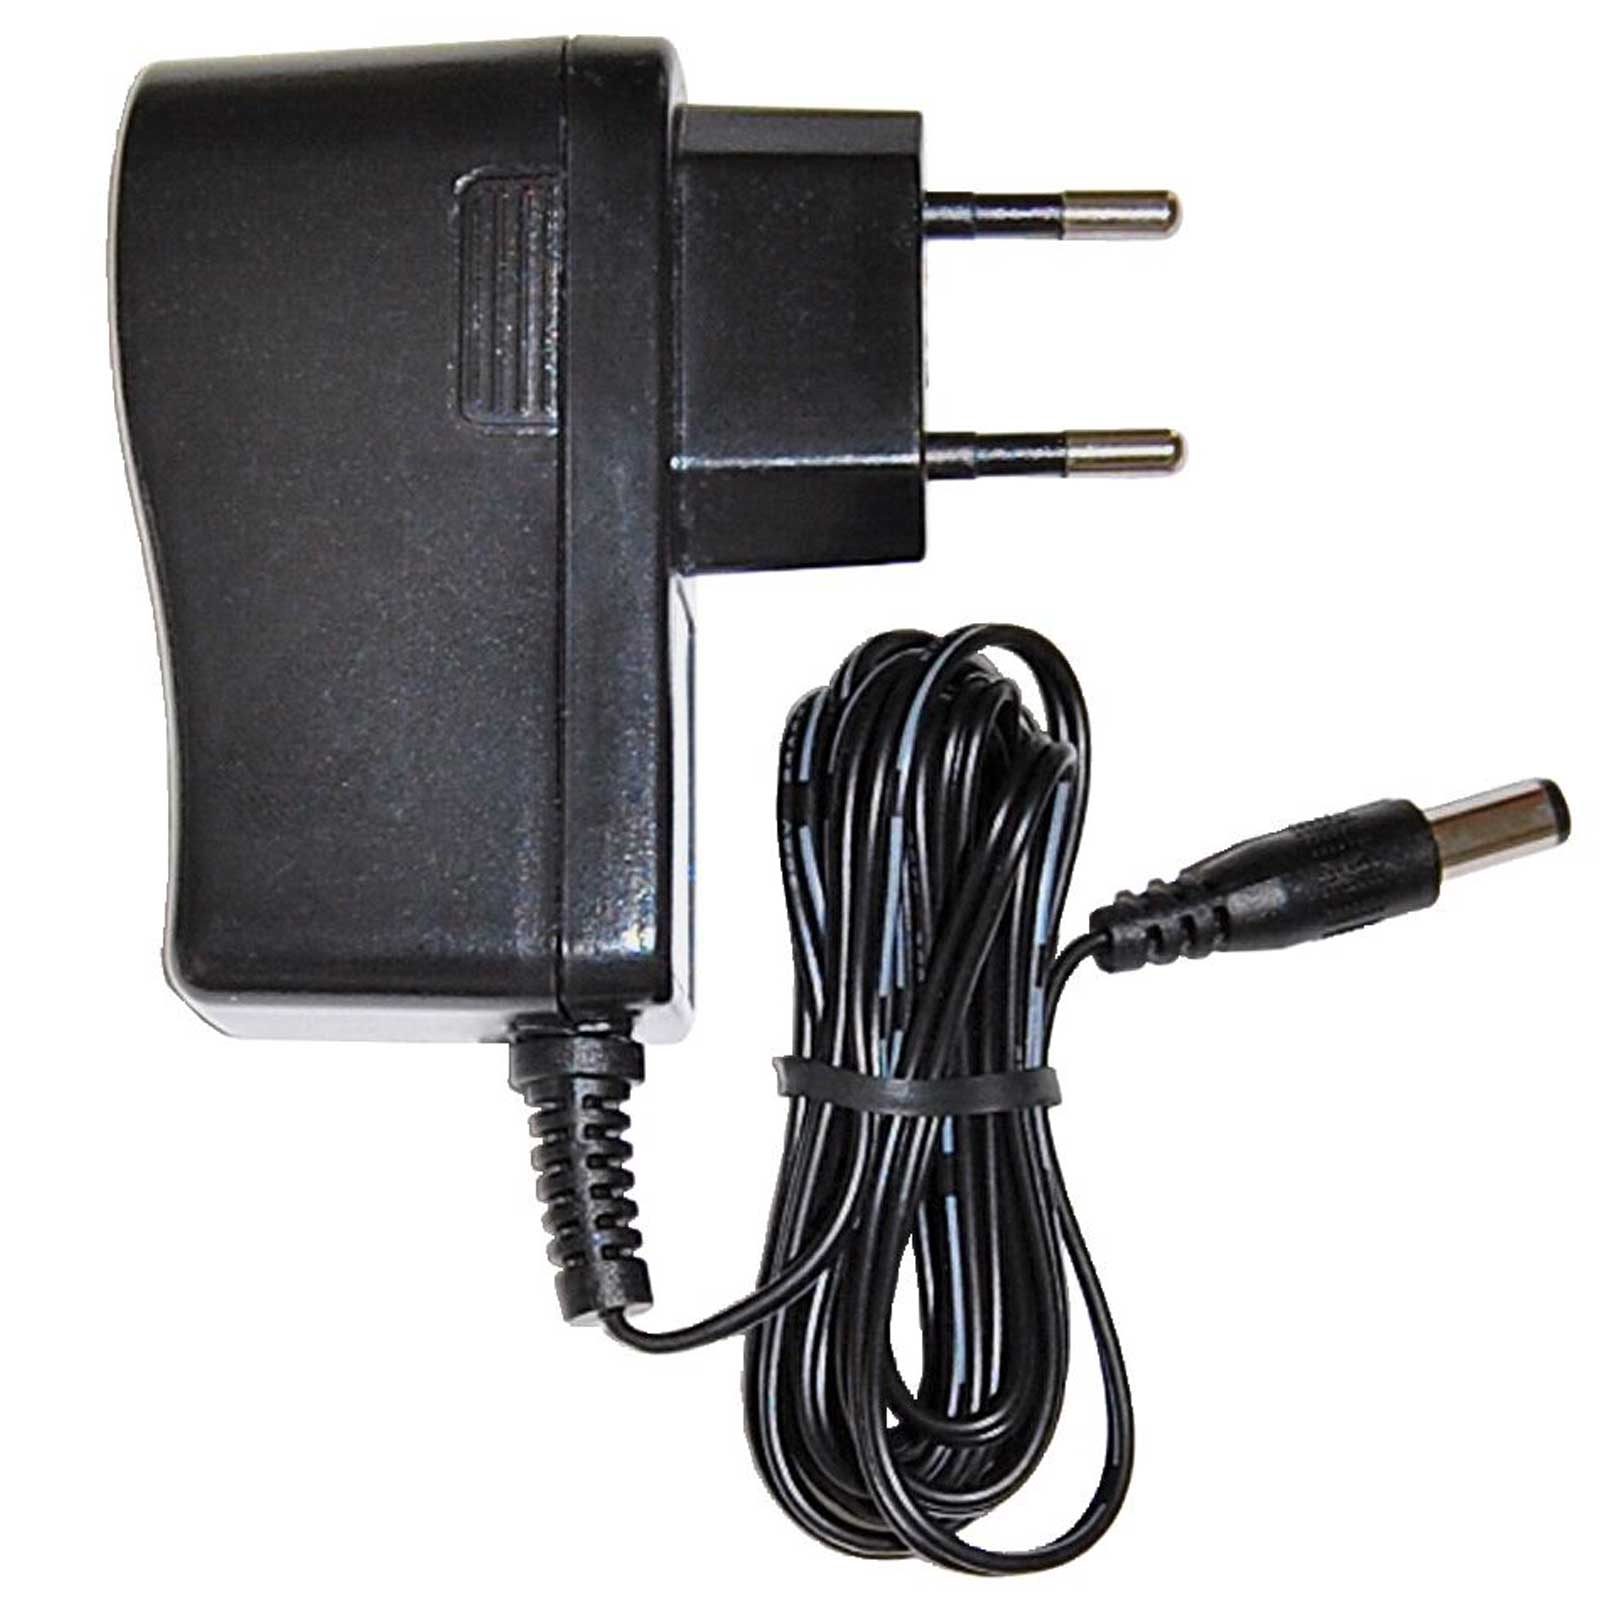 Power adapter for Sun Power Solar electric fence device